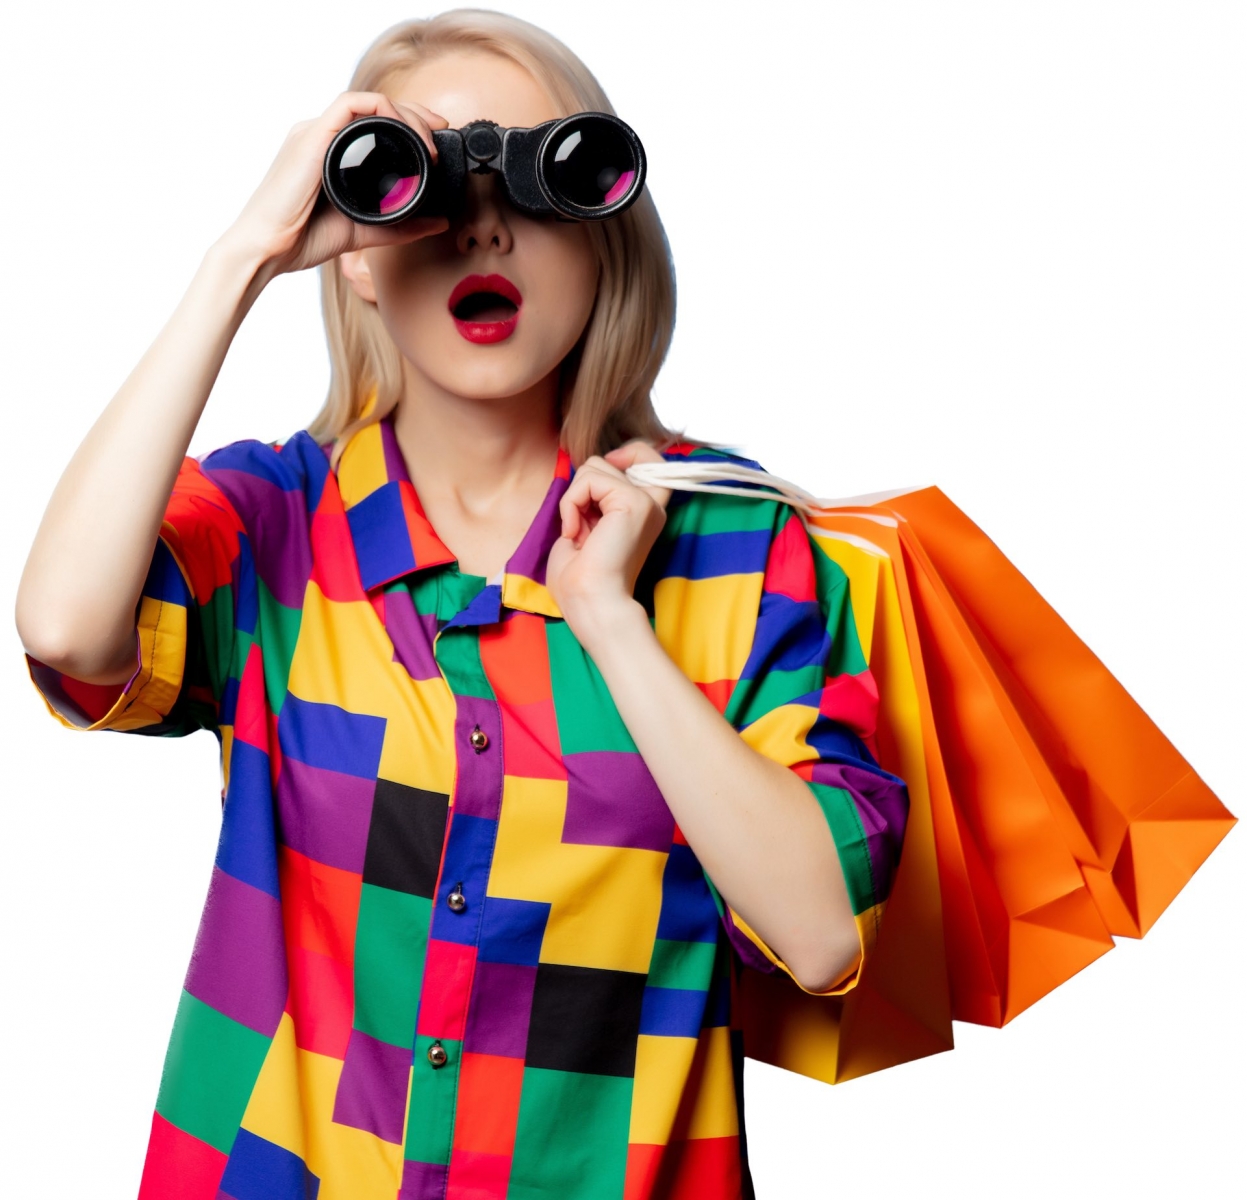 Blonde girl in 90s shirt with binoculars and shopping bags